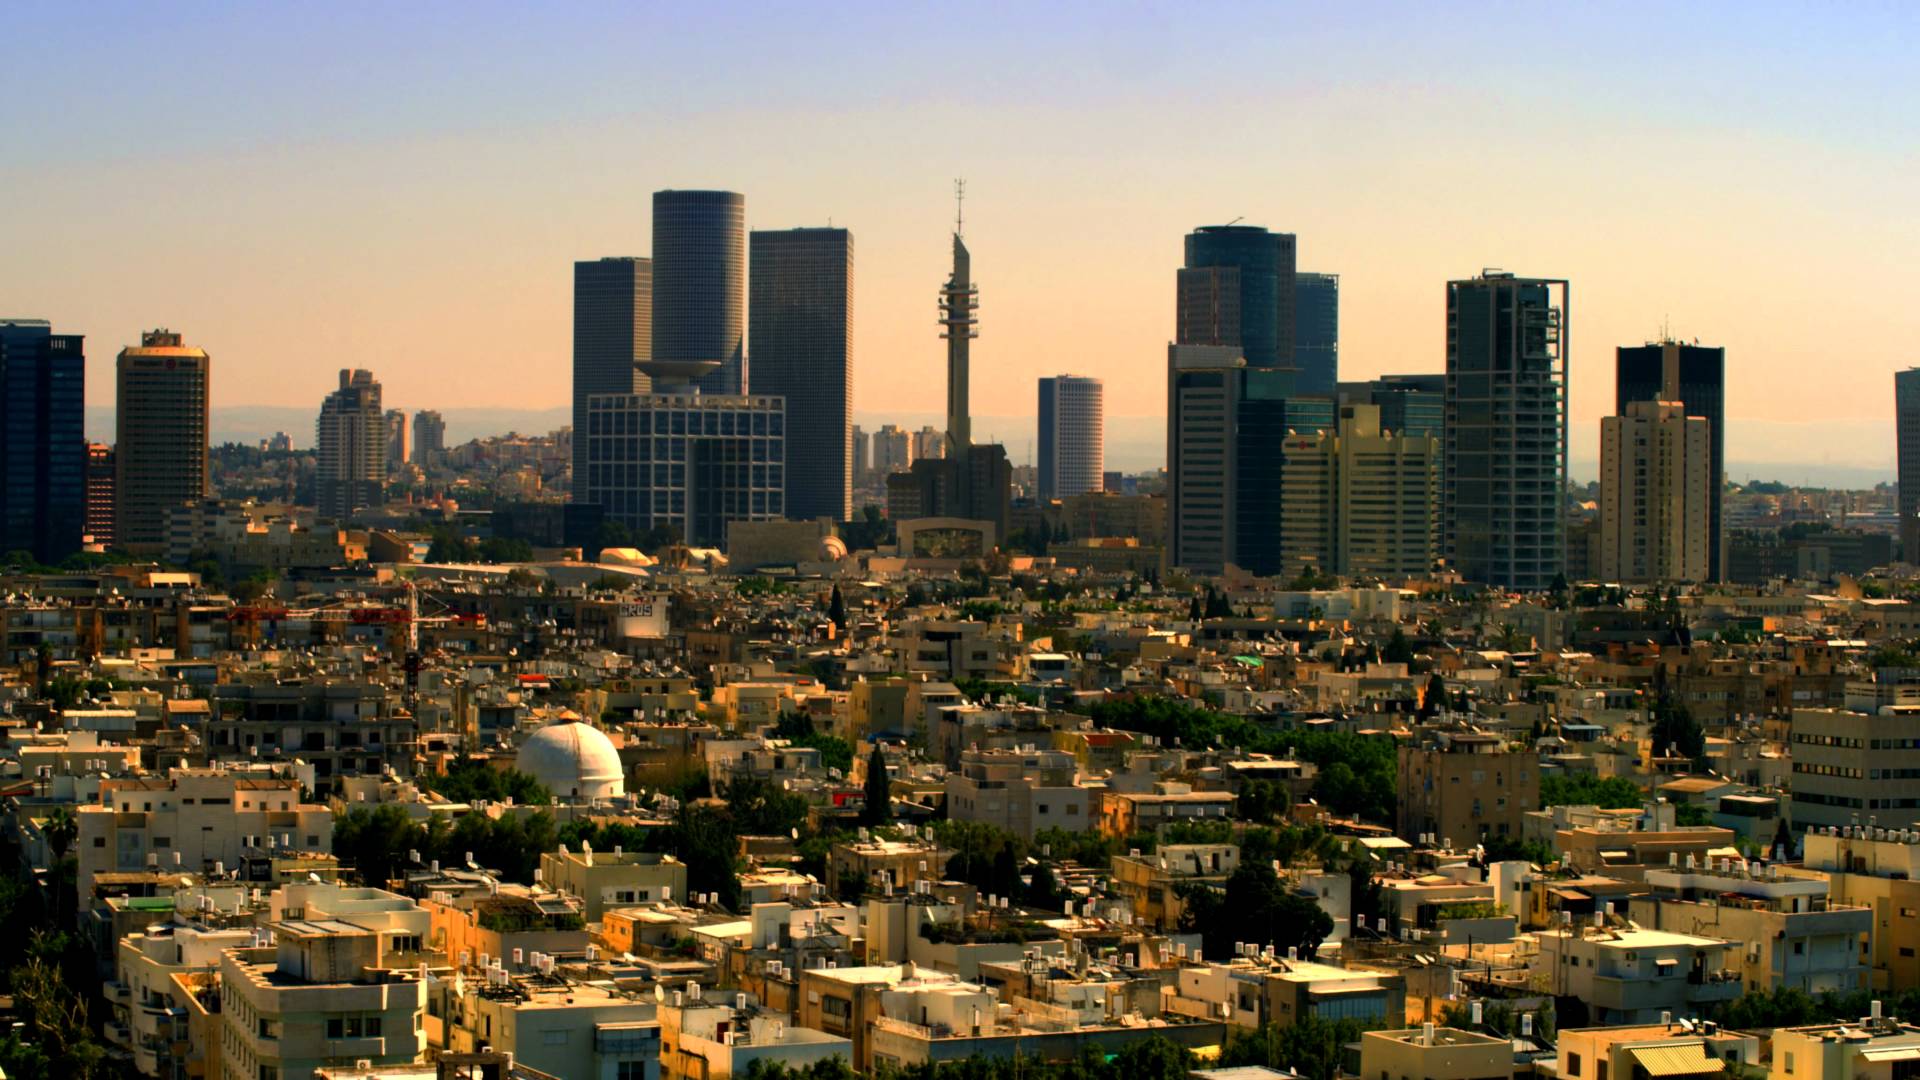 Royalty Free Stock Video Footage of a Tel Aviv cityscape shot